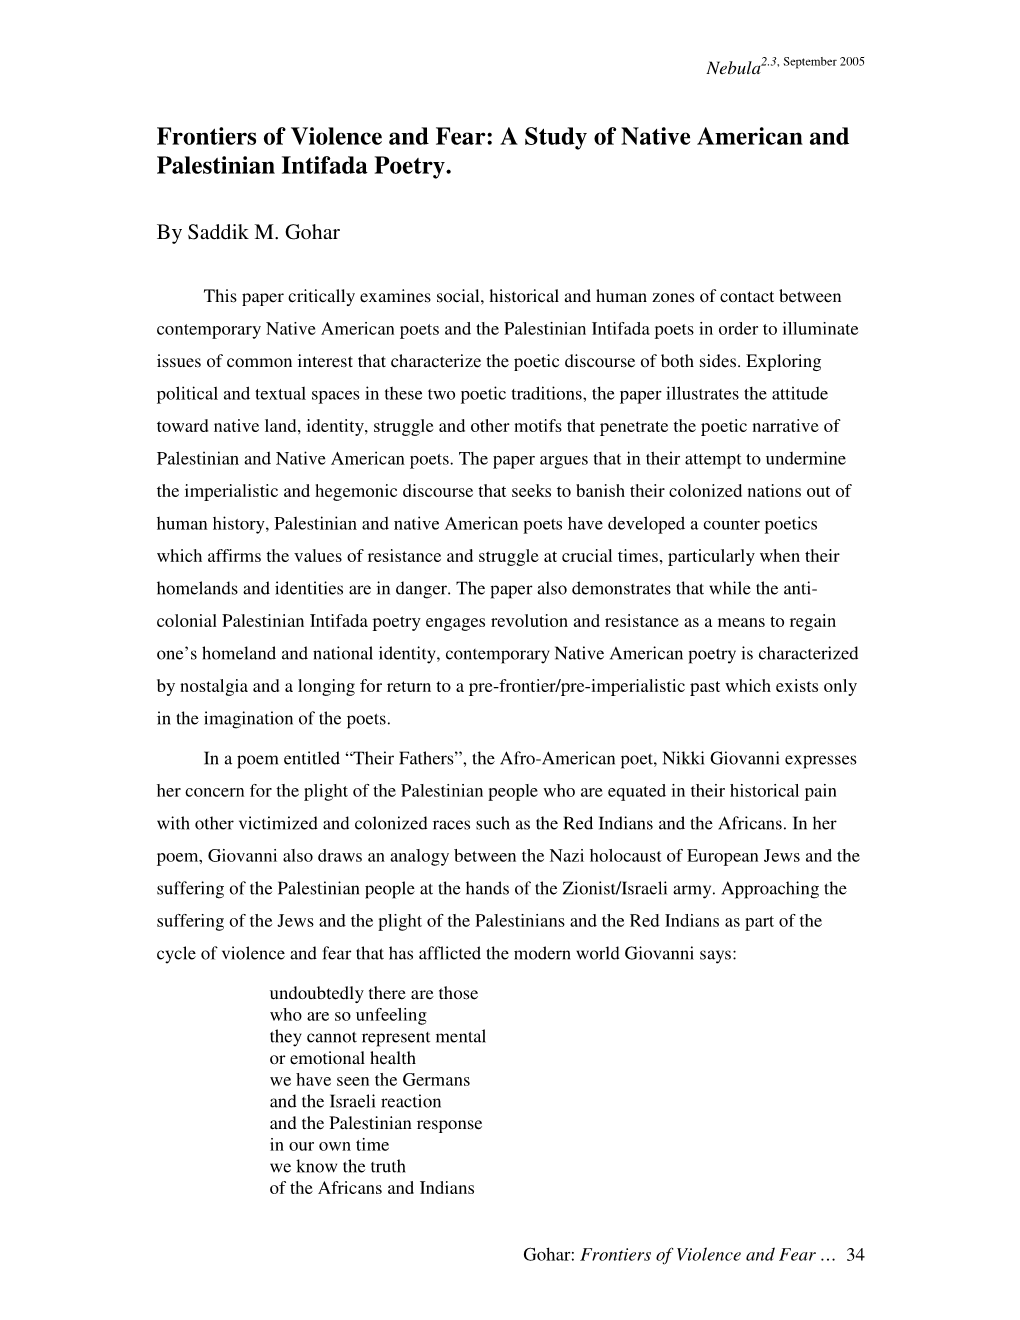 Frontiers of Violence and Fear: a Study of Native American and Palestinian Intifada Poetry